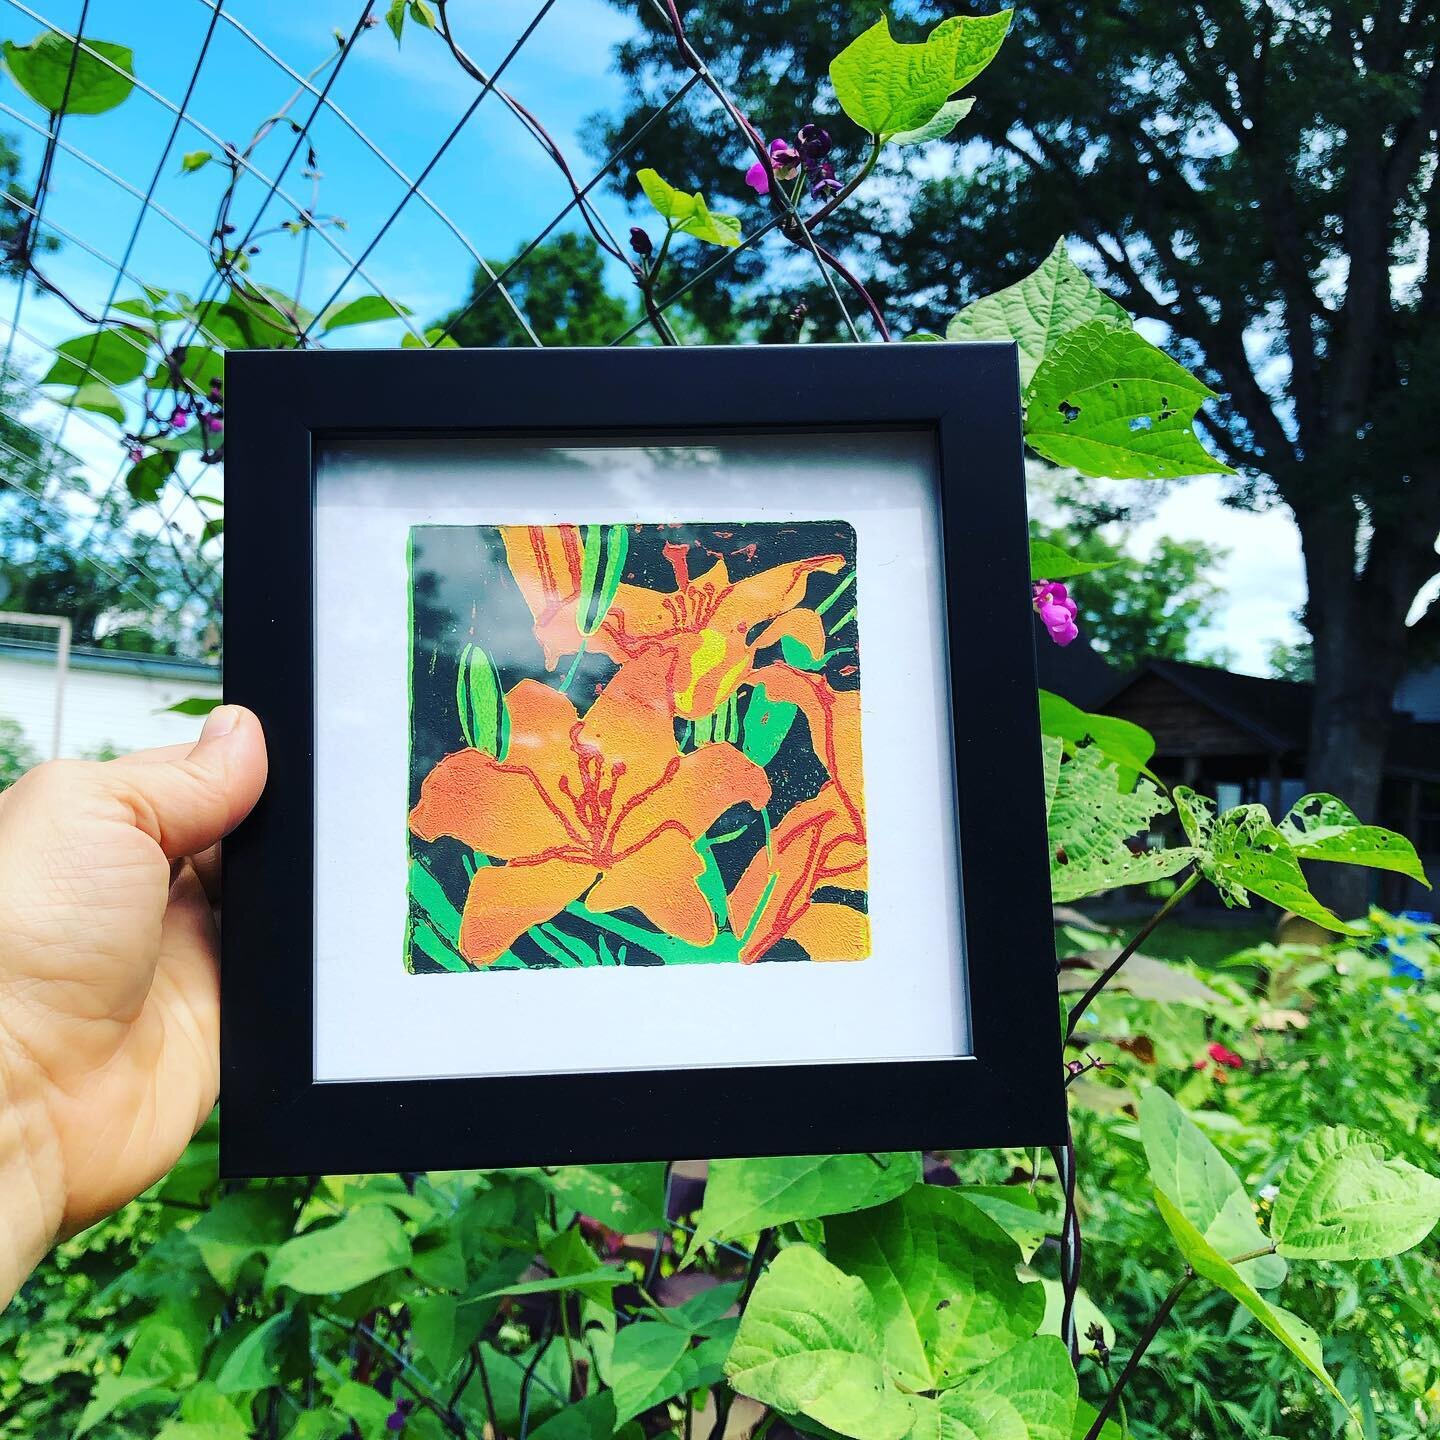 All framed up and out in the wild! I think I want to do more flowers. Flowers belong inside and out. Flowers are healing for your head. #moreflowersmorelove